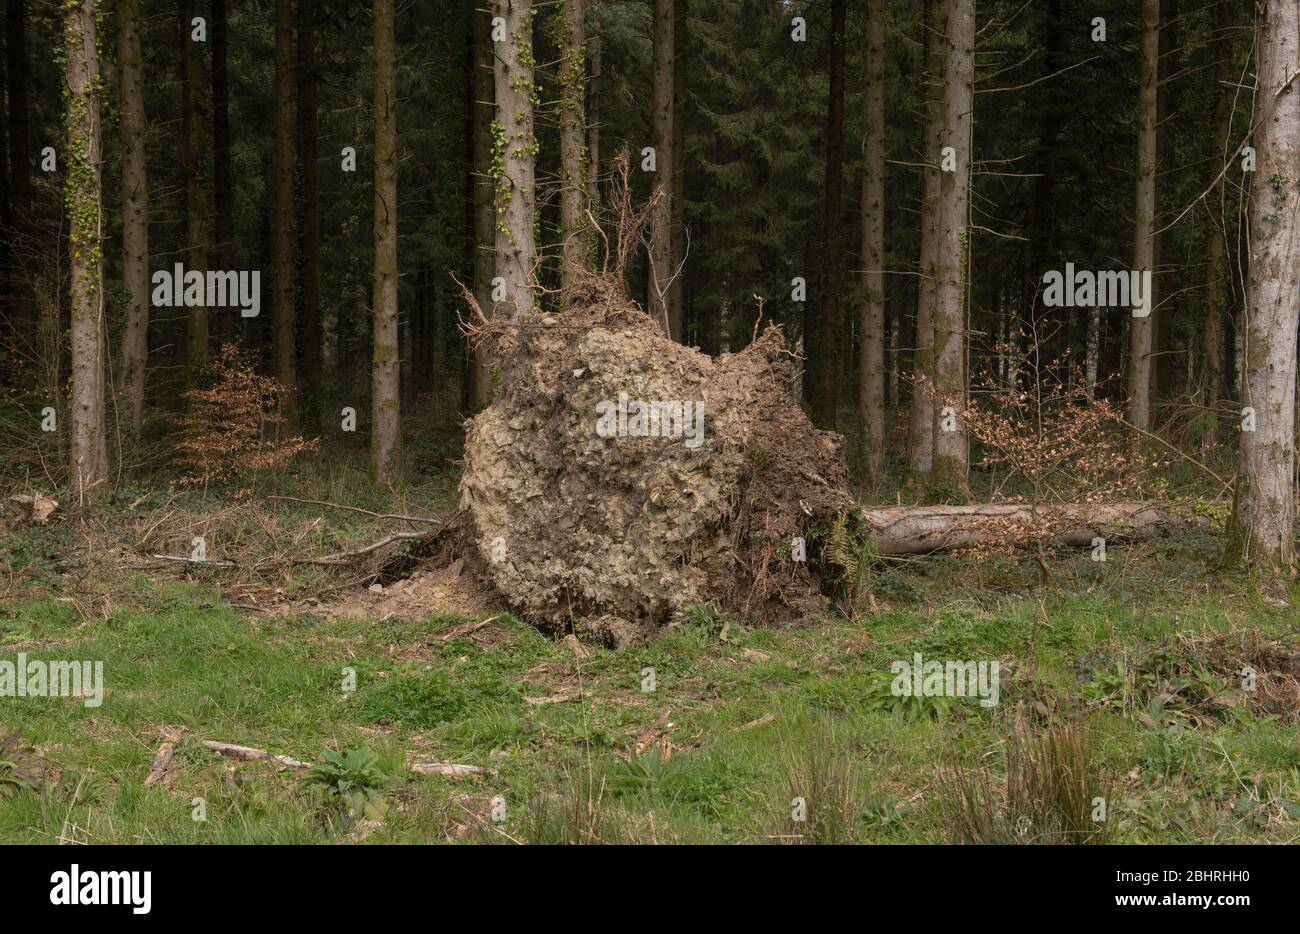 Uprooted Evergreen Douglas Fir Tree (Pseudotsuga menziesii) in a Forest in Rural Devon, England, UK Stock Photo